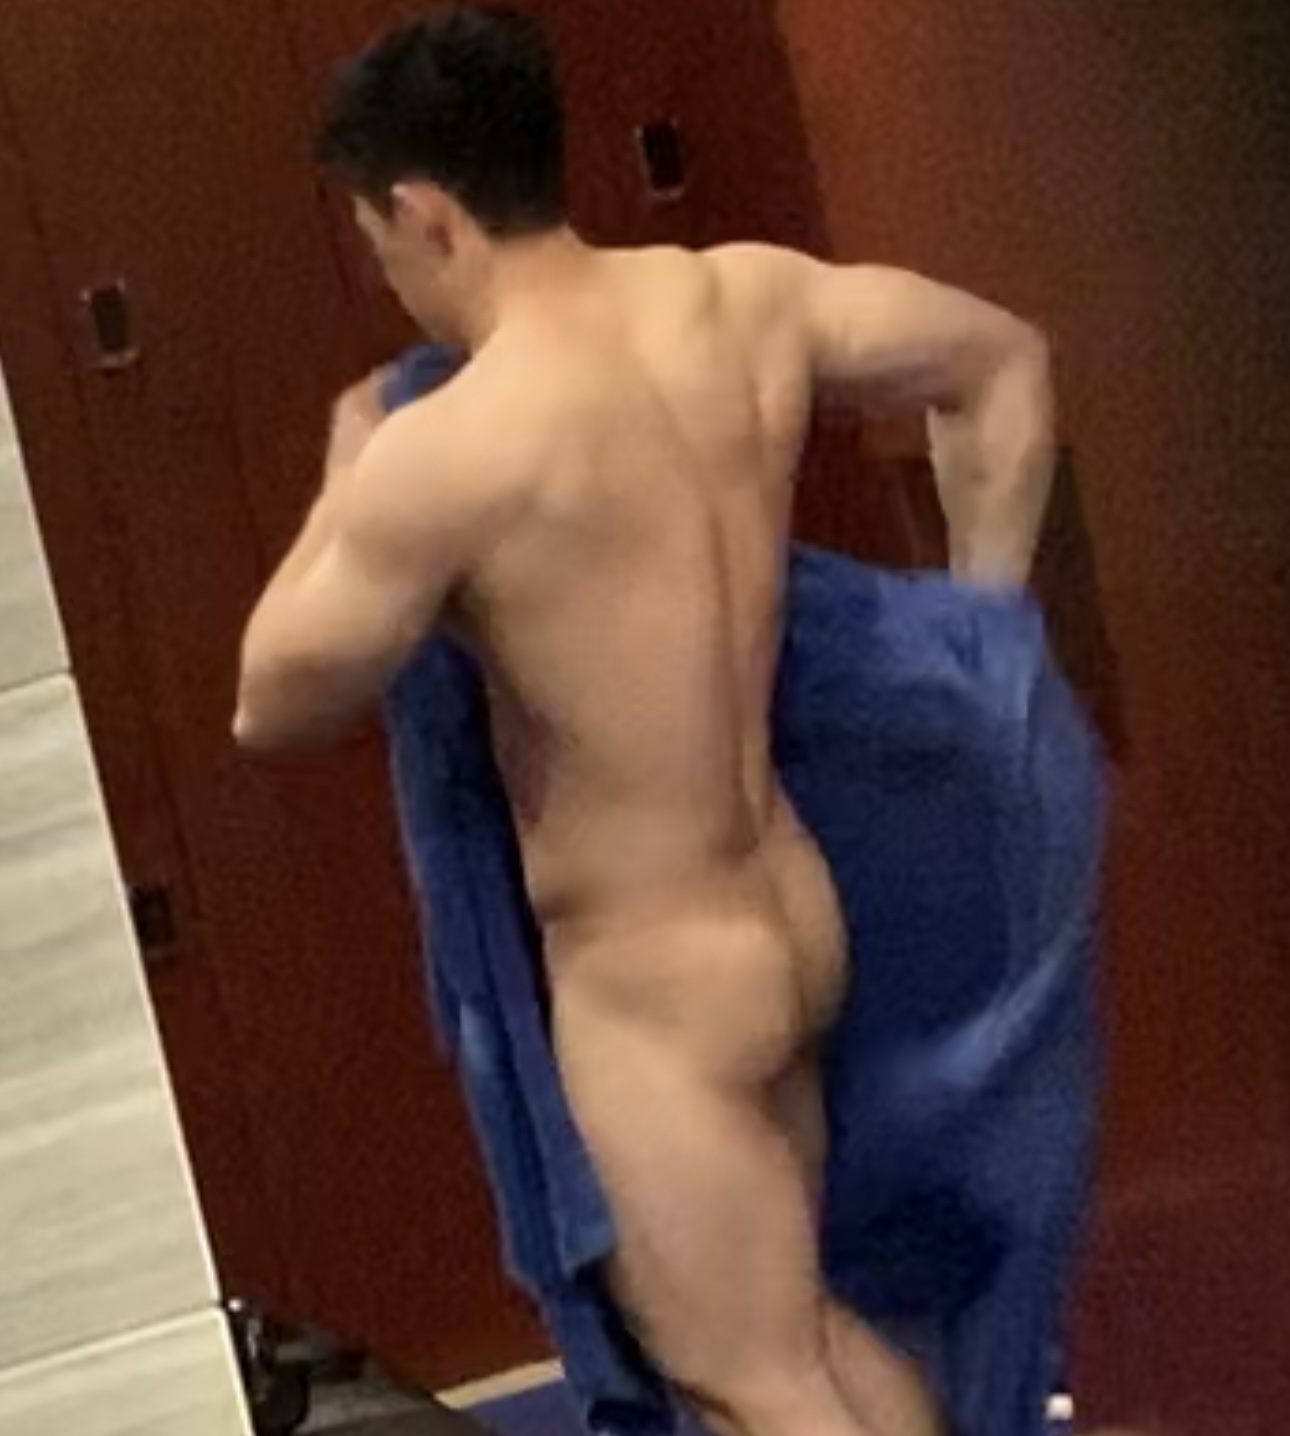 Handsome chinese hunk naked after shower full frontal